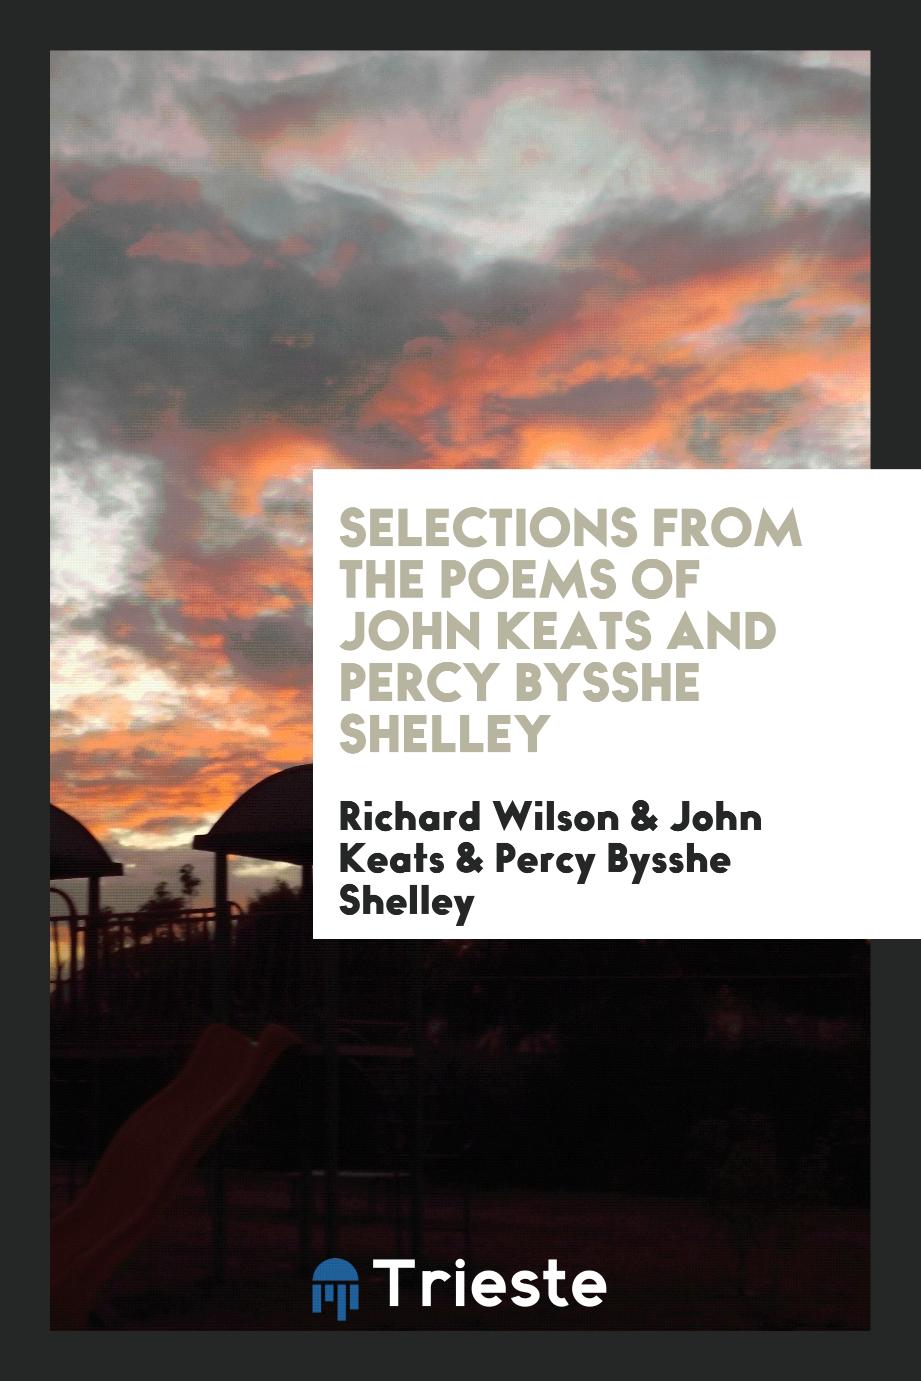 Selections from the poems of John Keats and Percy Bysshe Shelley